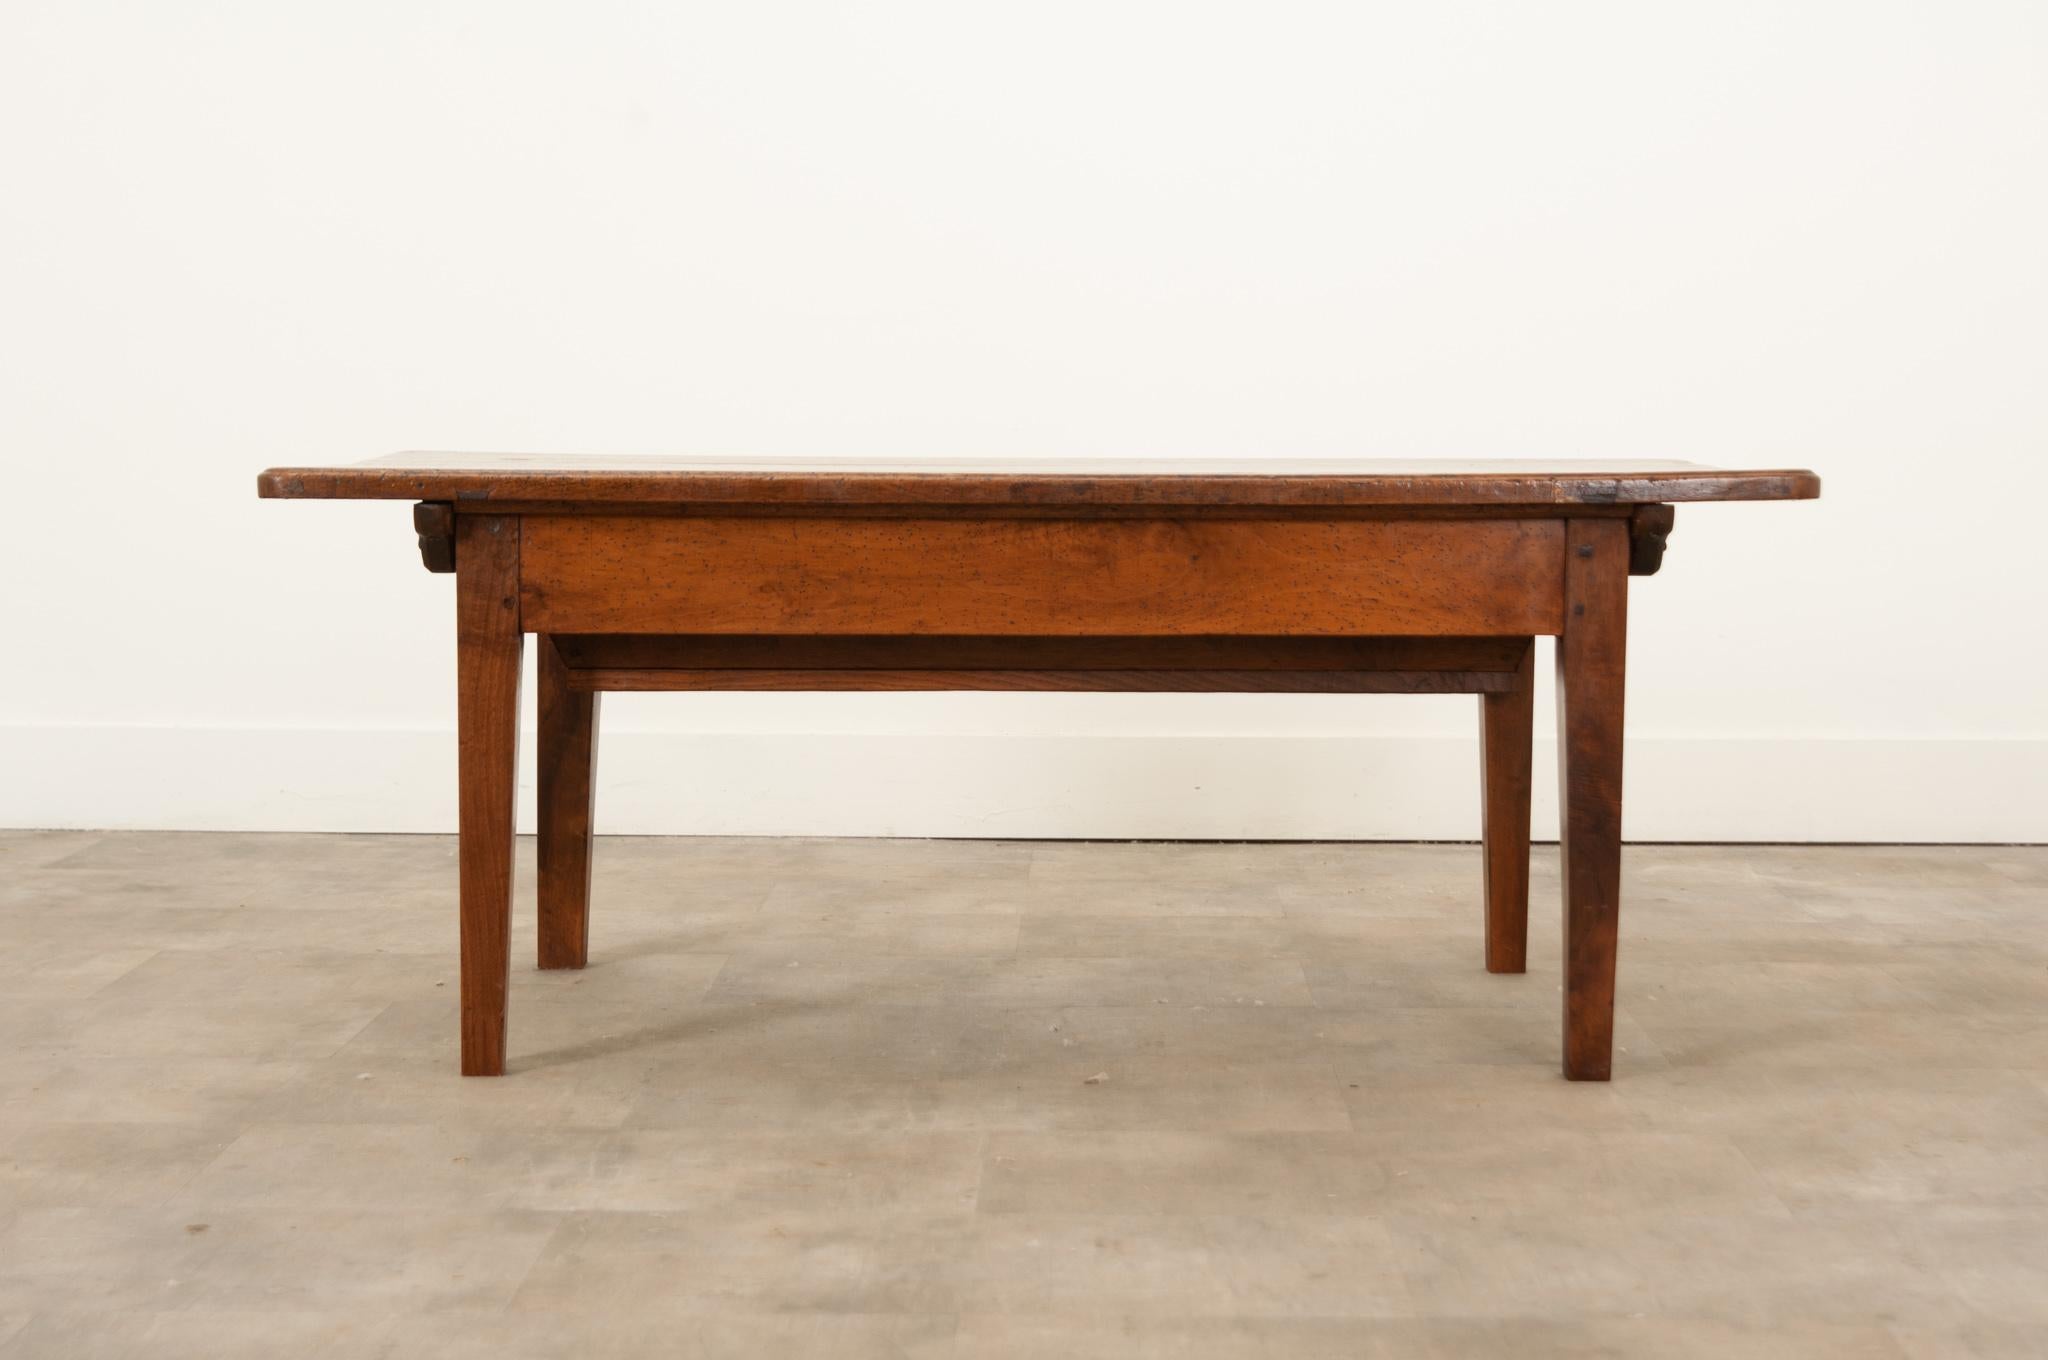 A rare French 19th century antique hand-crafted in France circa 1850. A hardy solid walnut petrin coffee table with removable top and dough bin base on square tapered legs. This kneading table features a rectangular removable top of solid planks